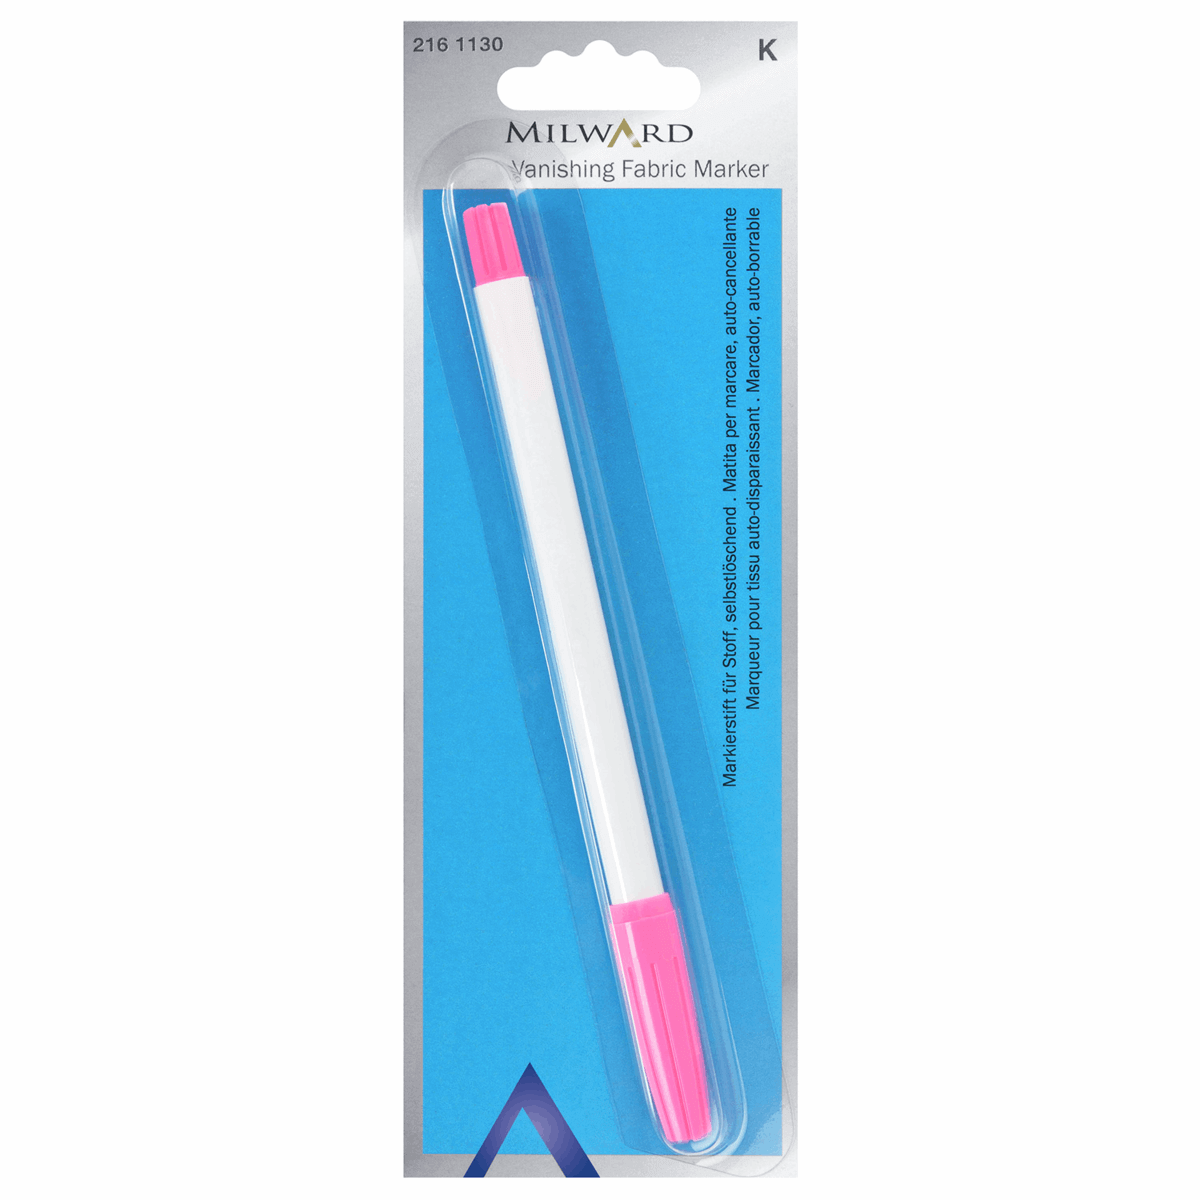 Milward Vanishing pen fabric marking pen: sewing, quilting, embroidery.